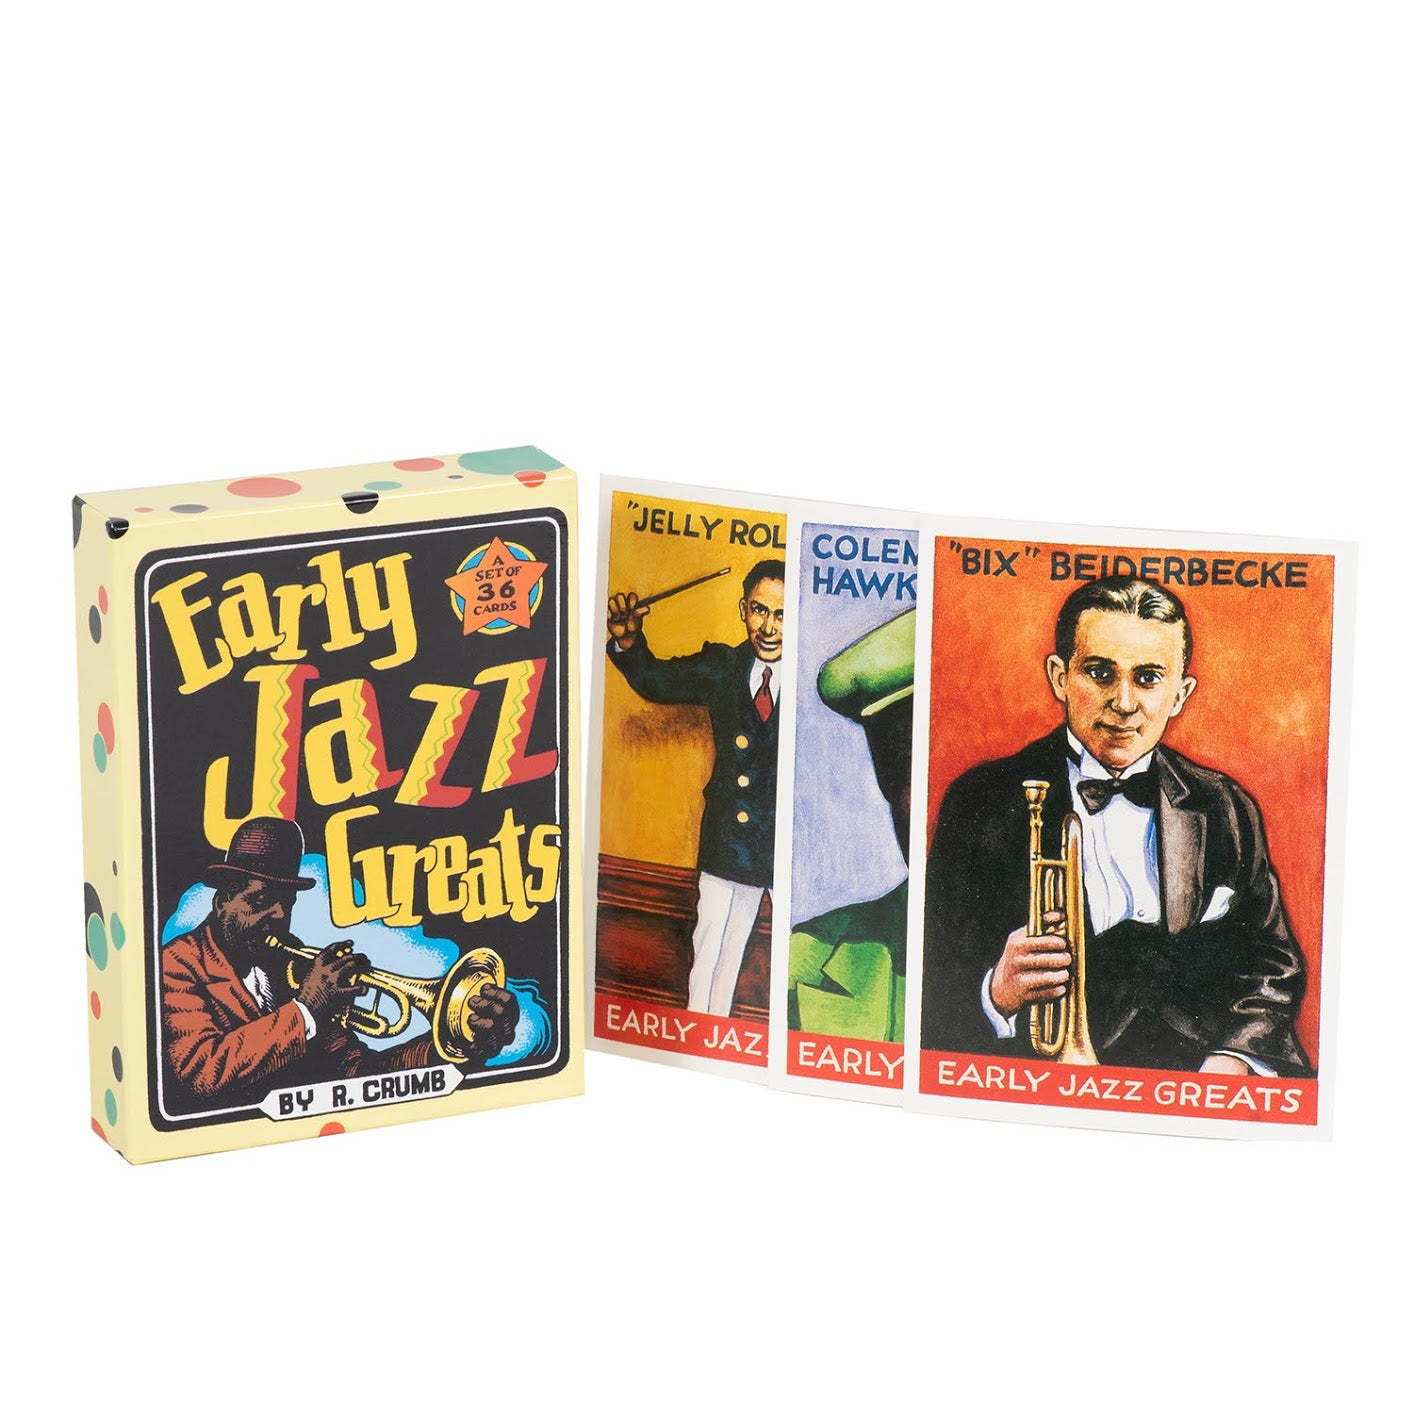 CIRCLES BOOKS Early Jazz Greats Boxed Trading Card Set by R. Crumb